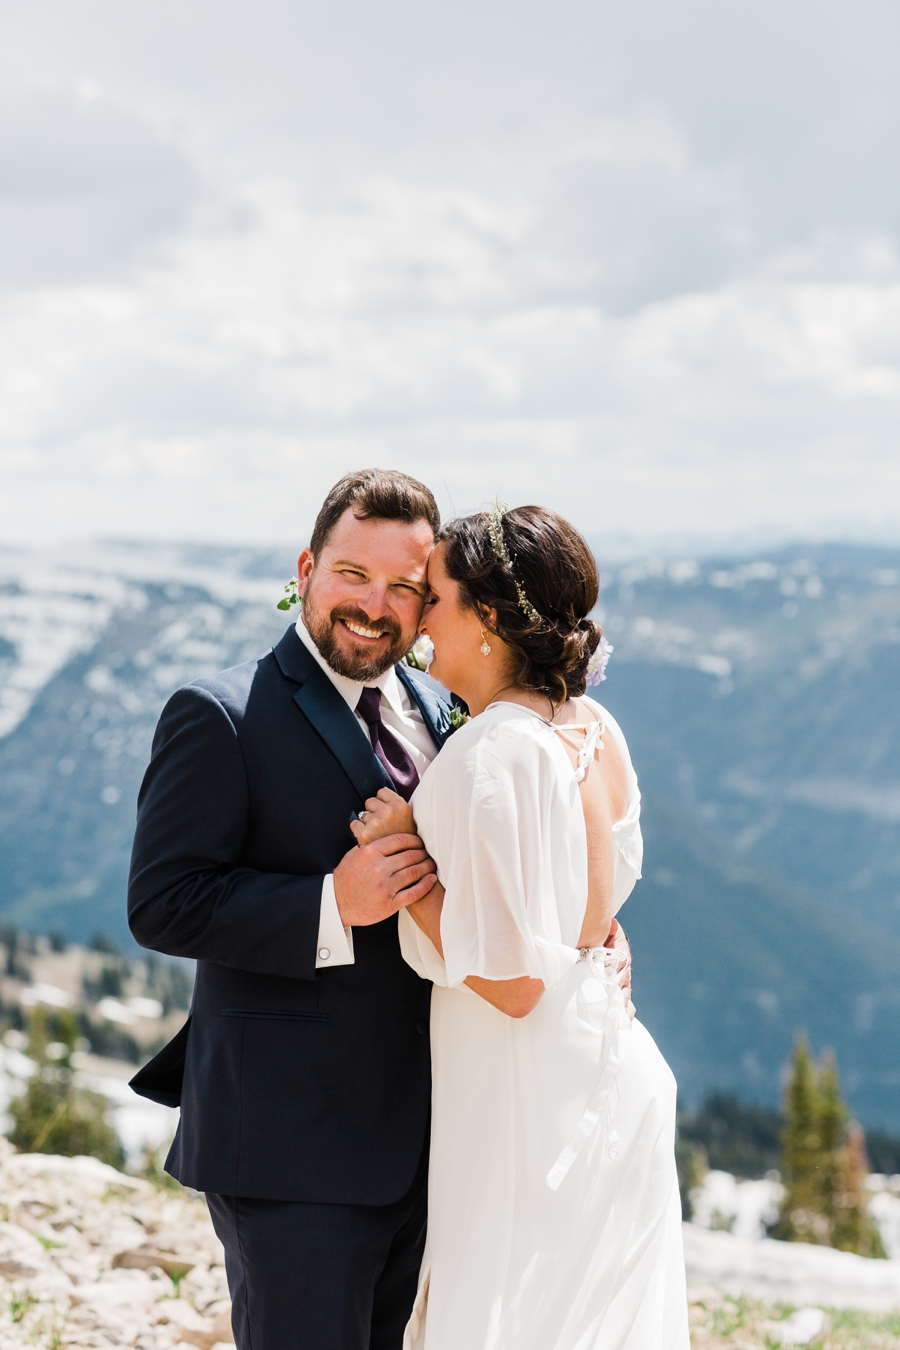 Bride and groom laugh together during their photos at Grand Targhee Resort by Jackson Hole wedding photographer Amy Galbraith